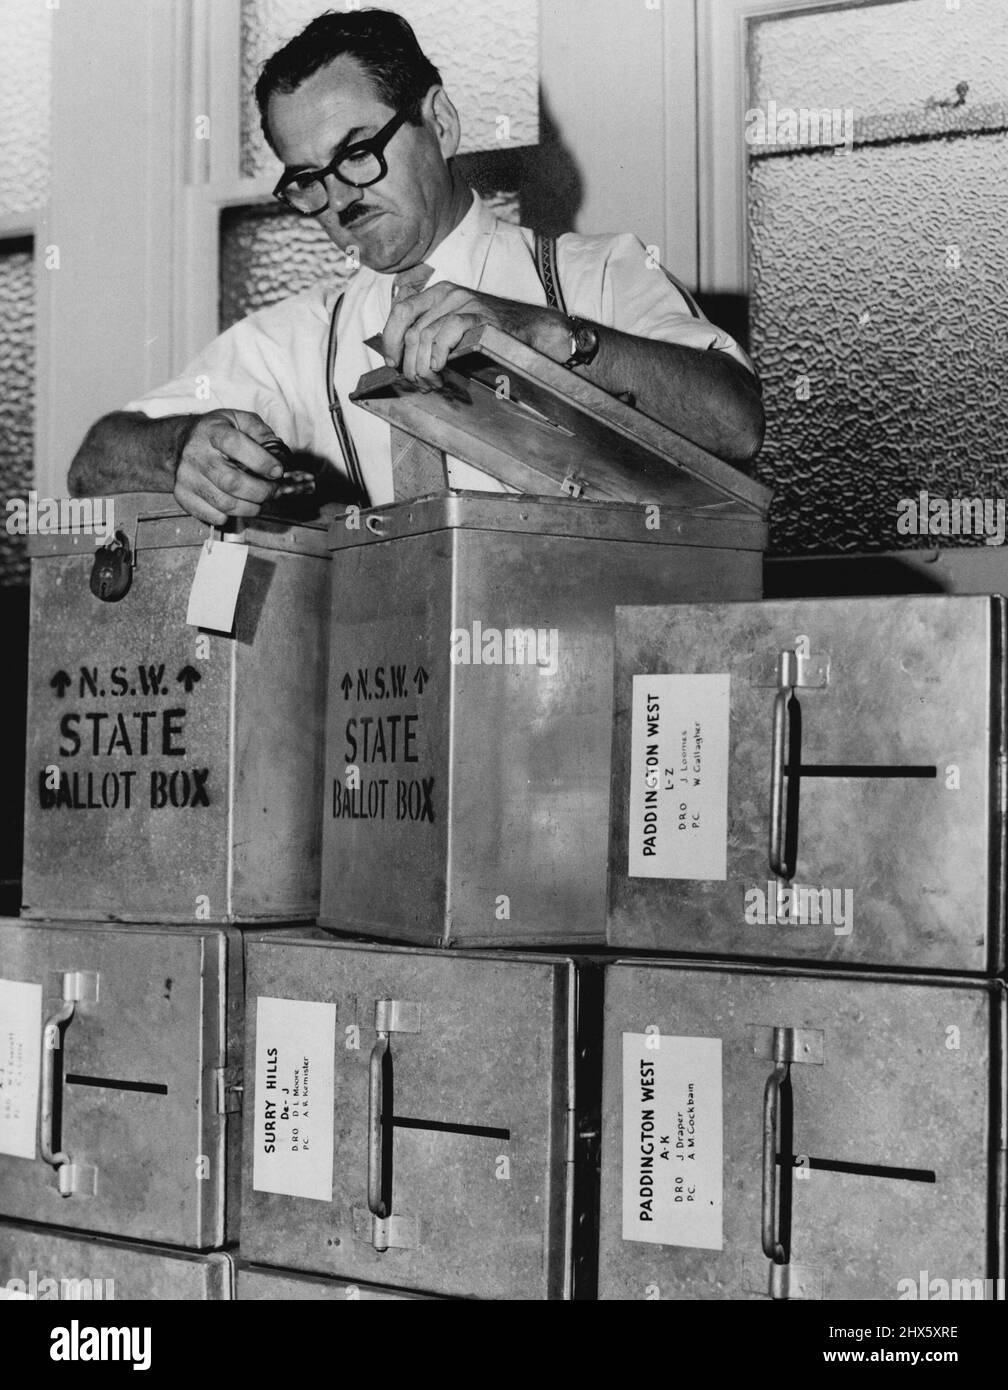 The State returning officer for the ***** electorate, Mr. J. H. Stubbs, locks up, yesterday, the last of 61 ballot boxes he will send to polling booths in his electorate for the referendum next Saturday. The boxes are stacked in Darlington Town Hall and will be taken to the polling booths later this week. April 25, 1961.;The State returning officer for the ***** electorate, Mr. J. H. Stubbs, locks up, yesterday, the last of 61 ballot boxes he will send to polling booths in his electorate for the Stock Photo